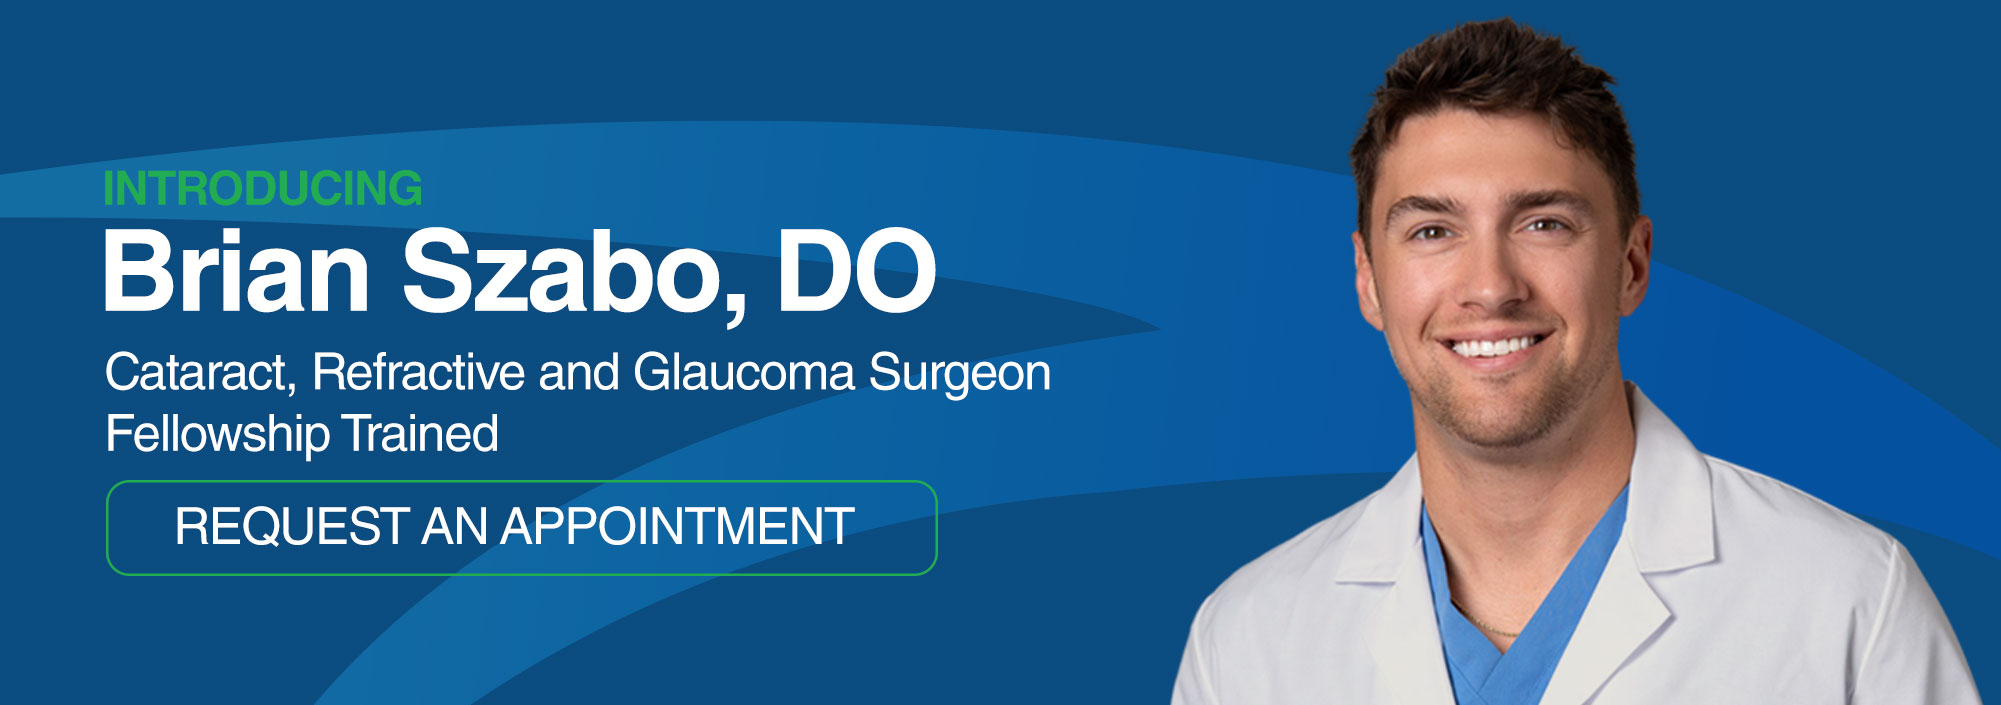 Dr. Brian Szabo, DO. Request an Appointment